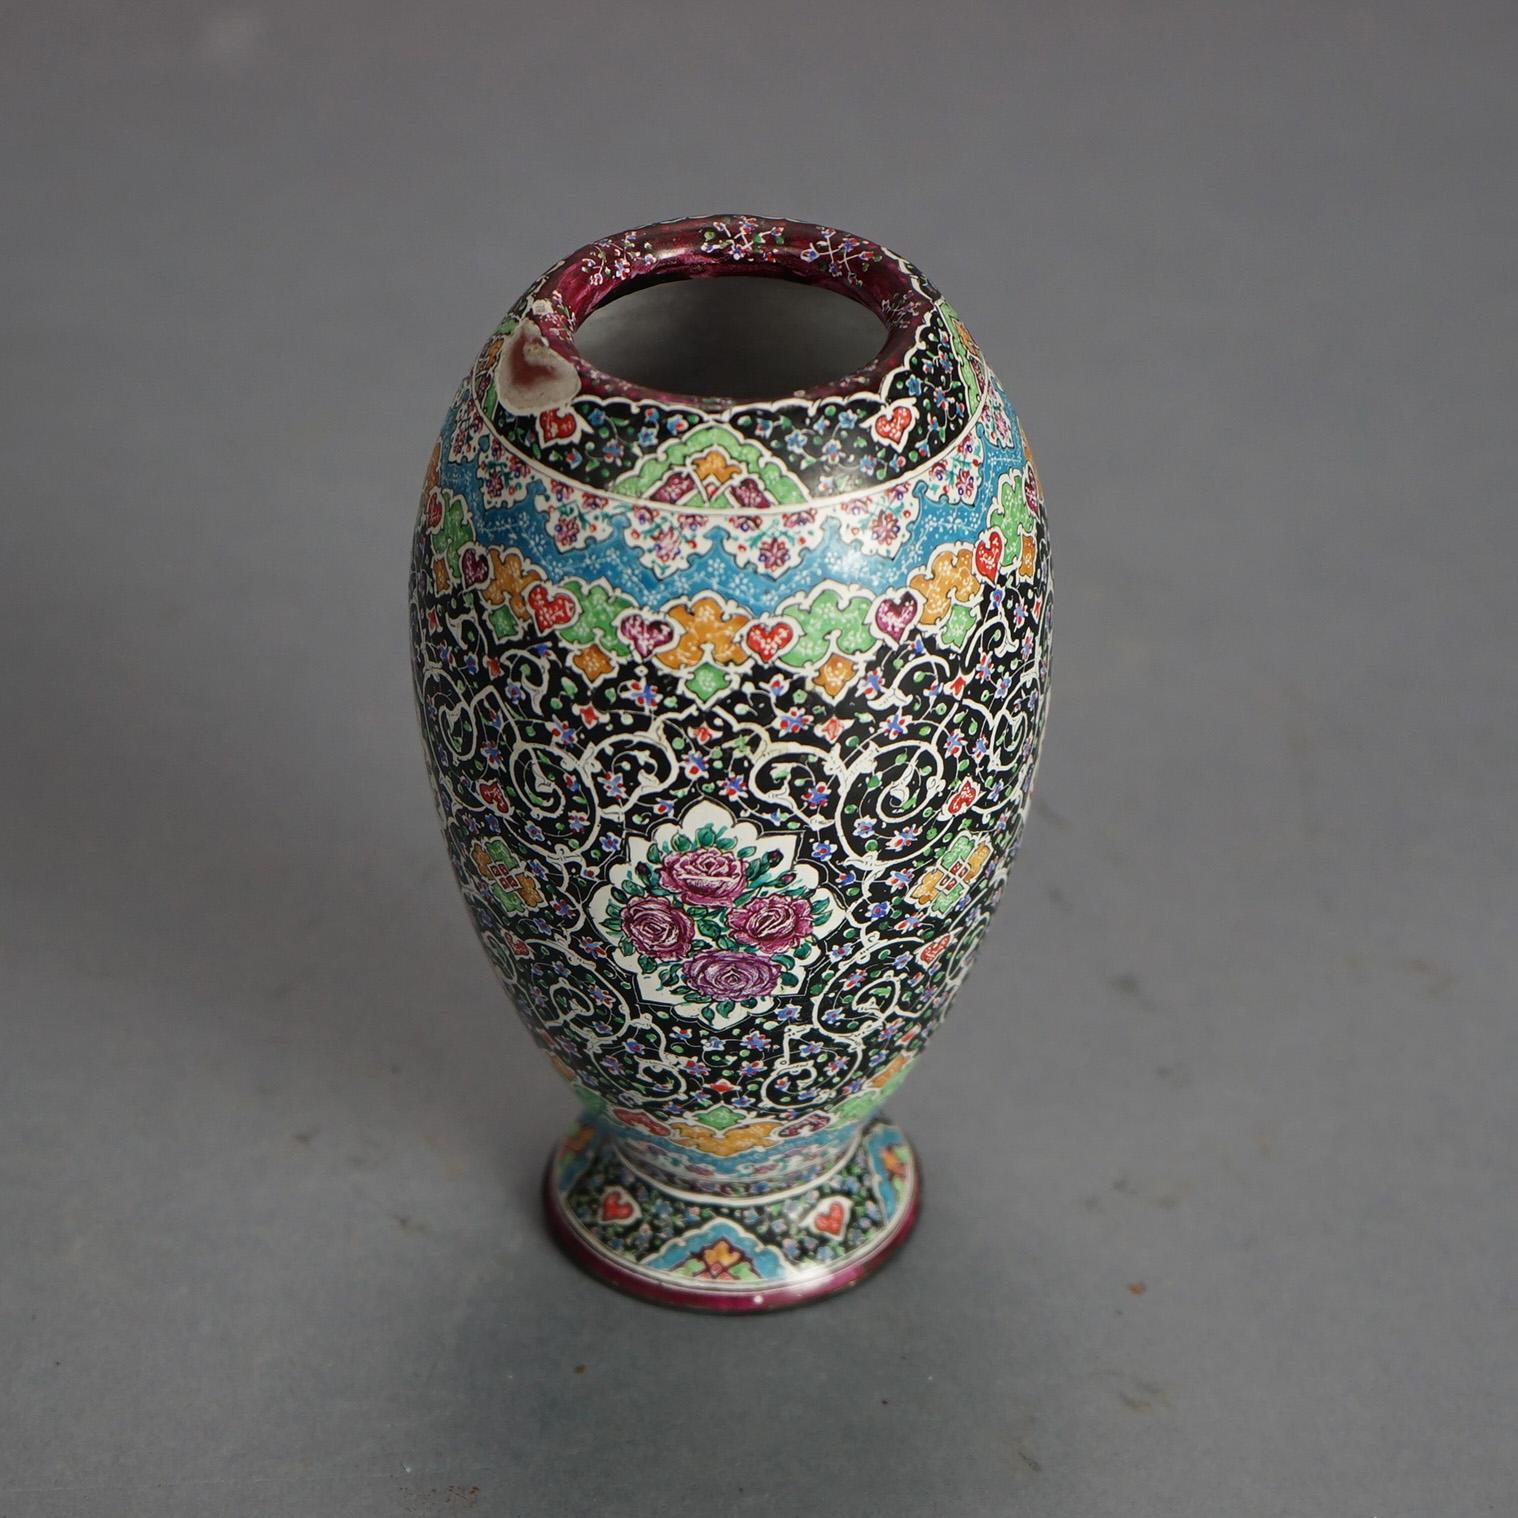 Chinese Enameled & Polychromed Footed Vase with Tree of Life & Birds 20thC
Measures - 5.75